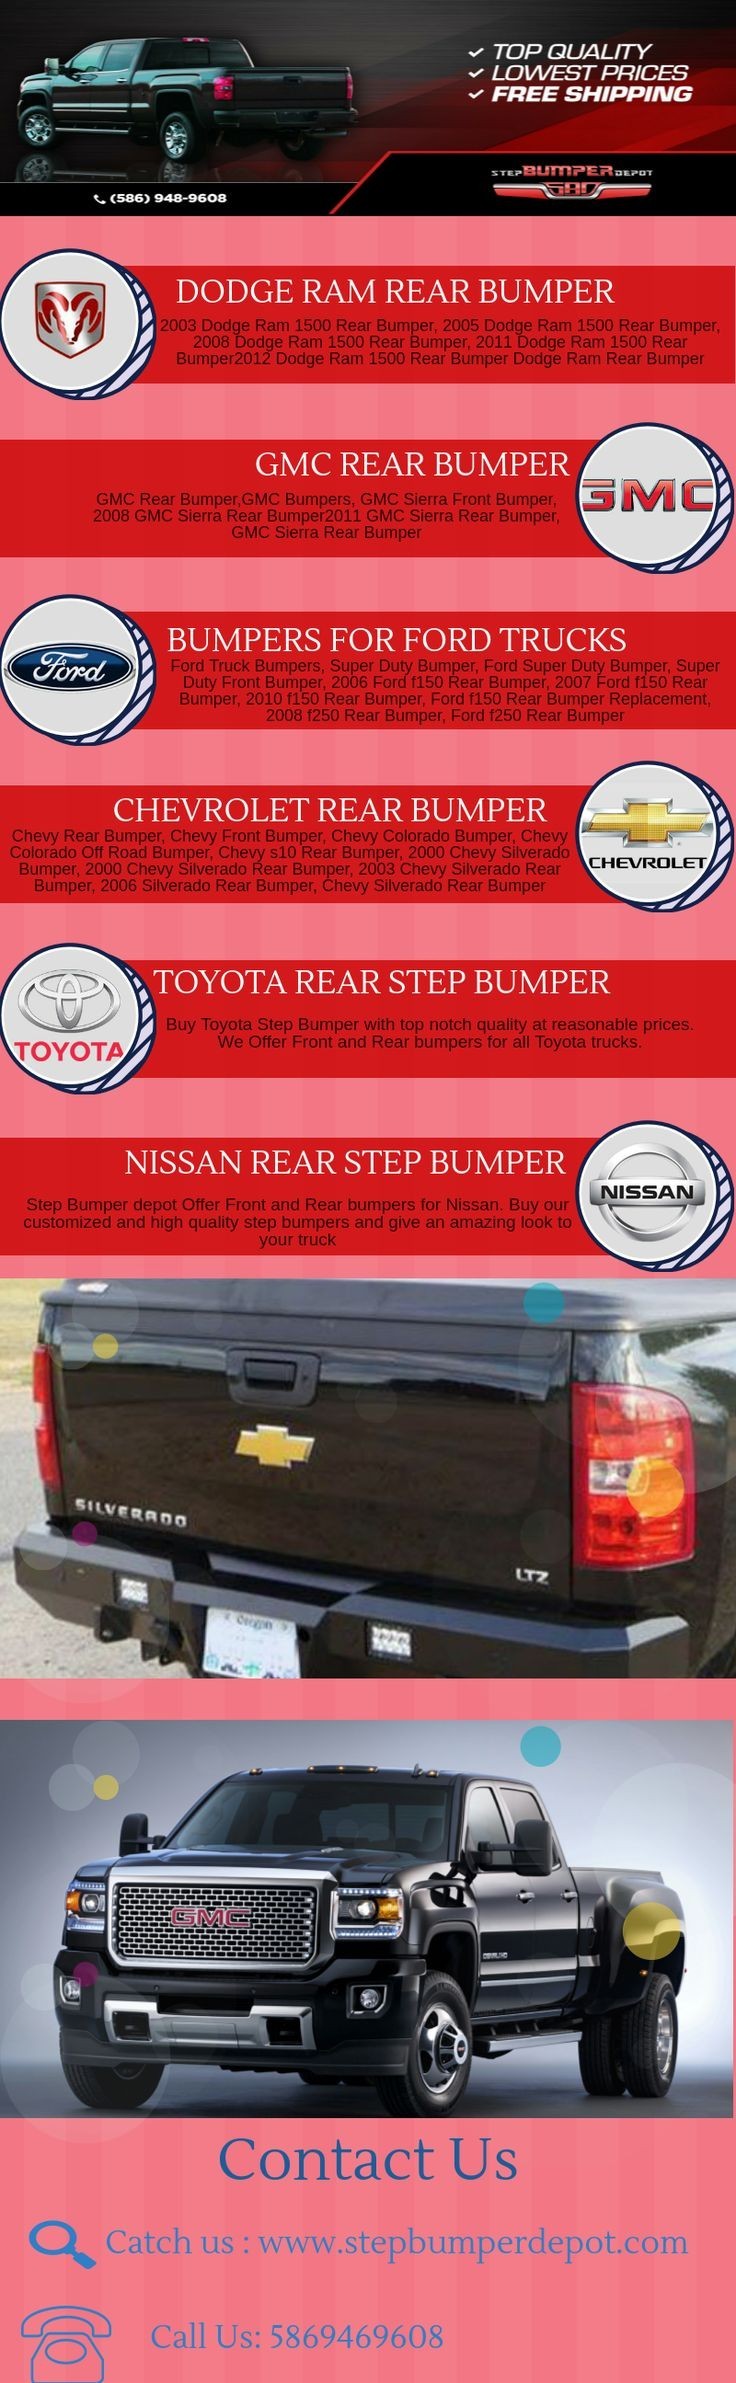 Looking for Step bumpers for your truck Get rear front bumpers step bumpers